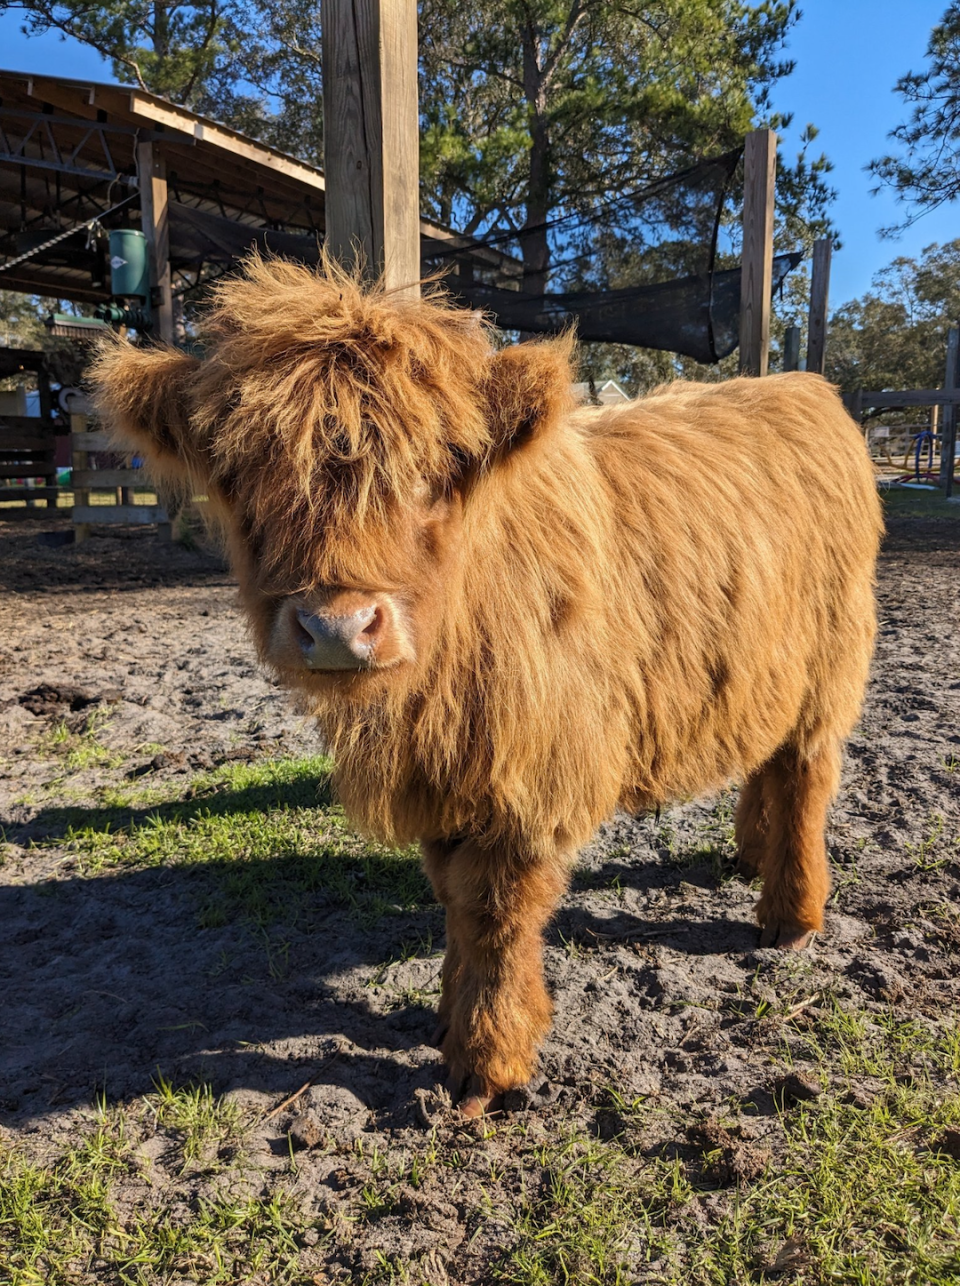 Rooterville Animal Sanctuary, 1208 County Road 315 in Melrose, is now offering cuddling sessions with Jett, its baby highland cow.